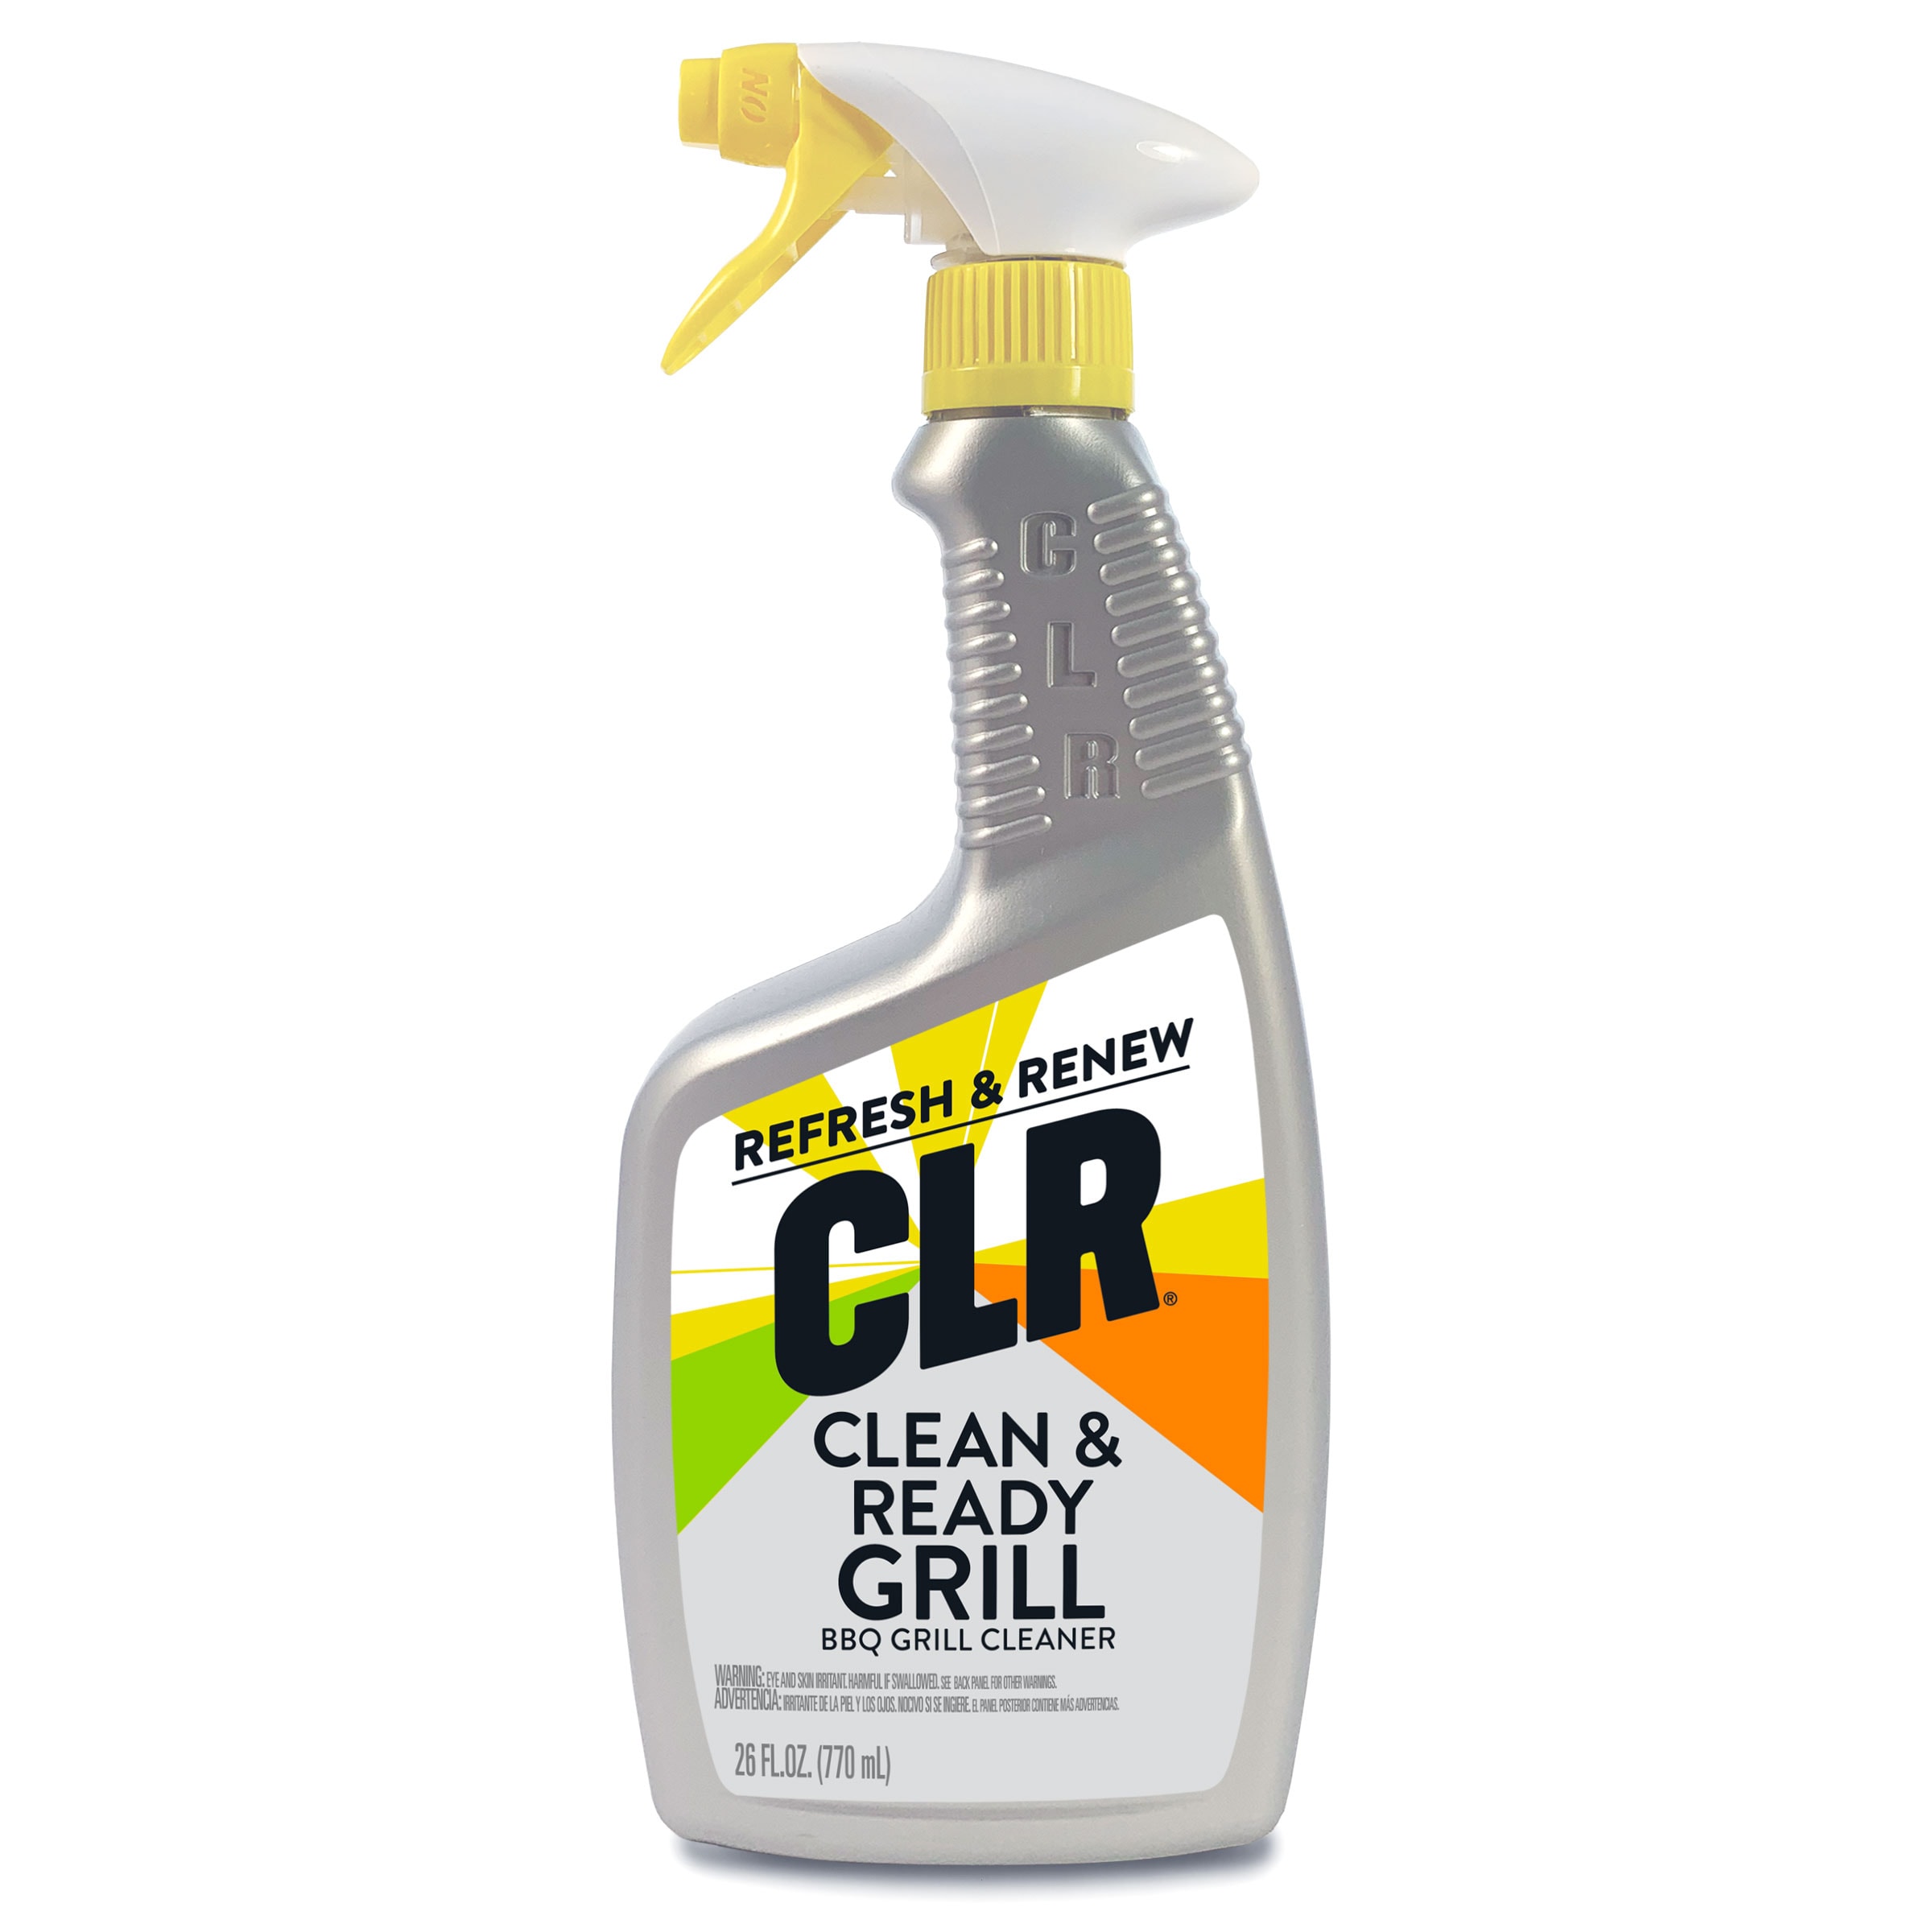 Goo Gone Grill & Grate Cleaner - Cleans Cooking Grates & Racks - 24 Fl. Oz.  3 Pack : Buy Online at Best Price in KSA - Souq is now : Health